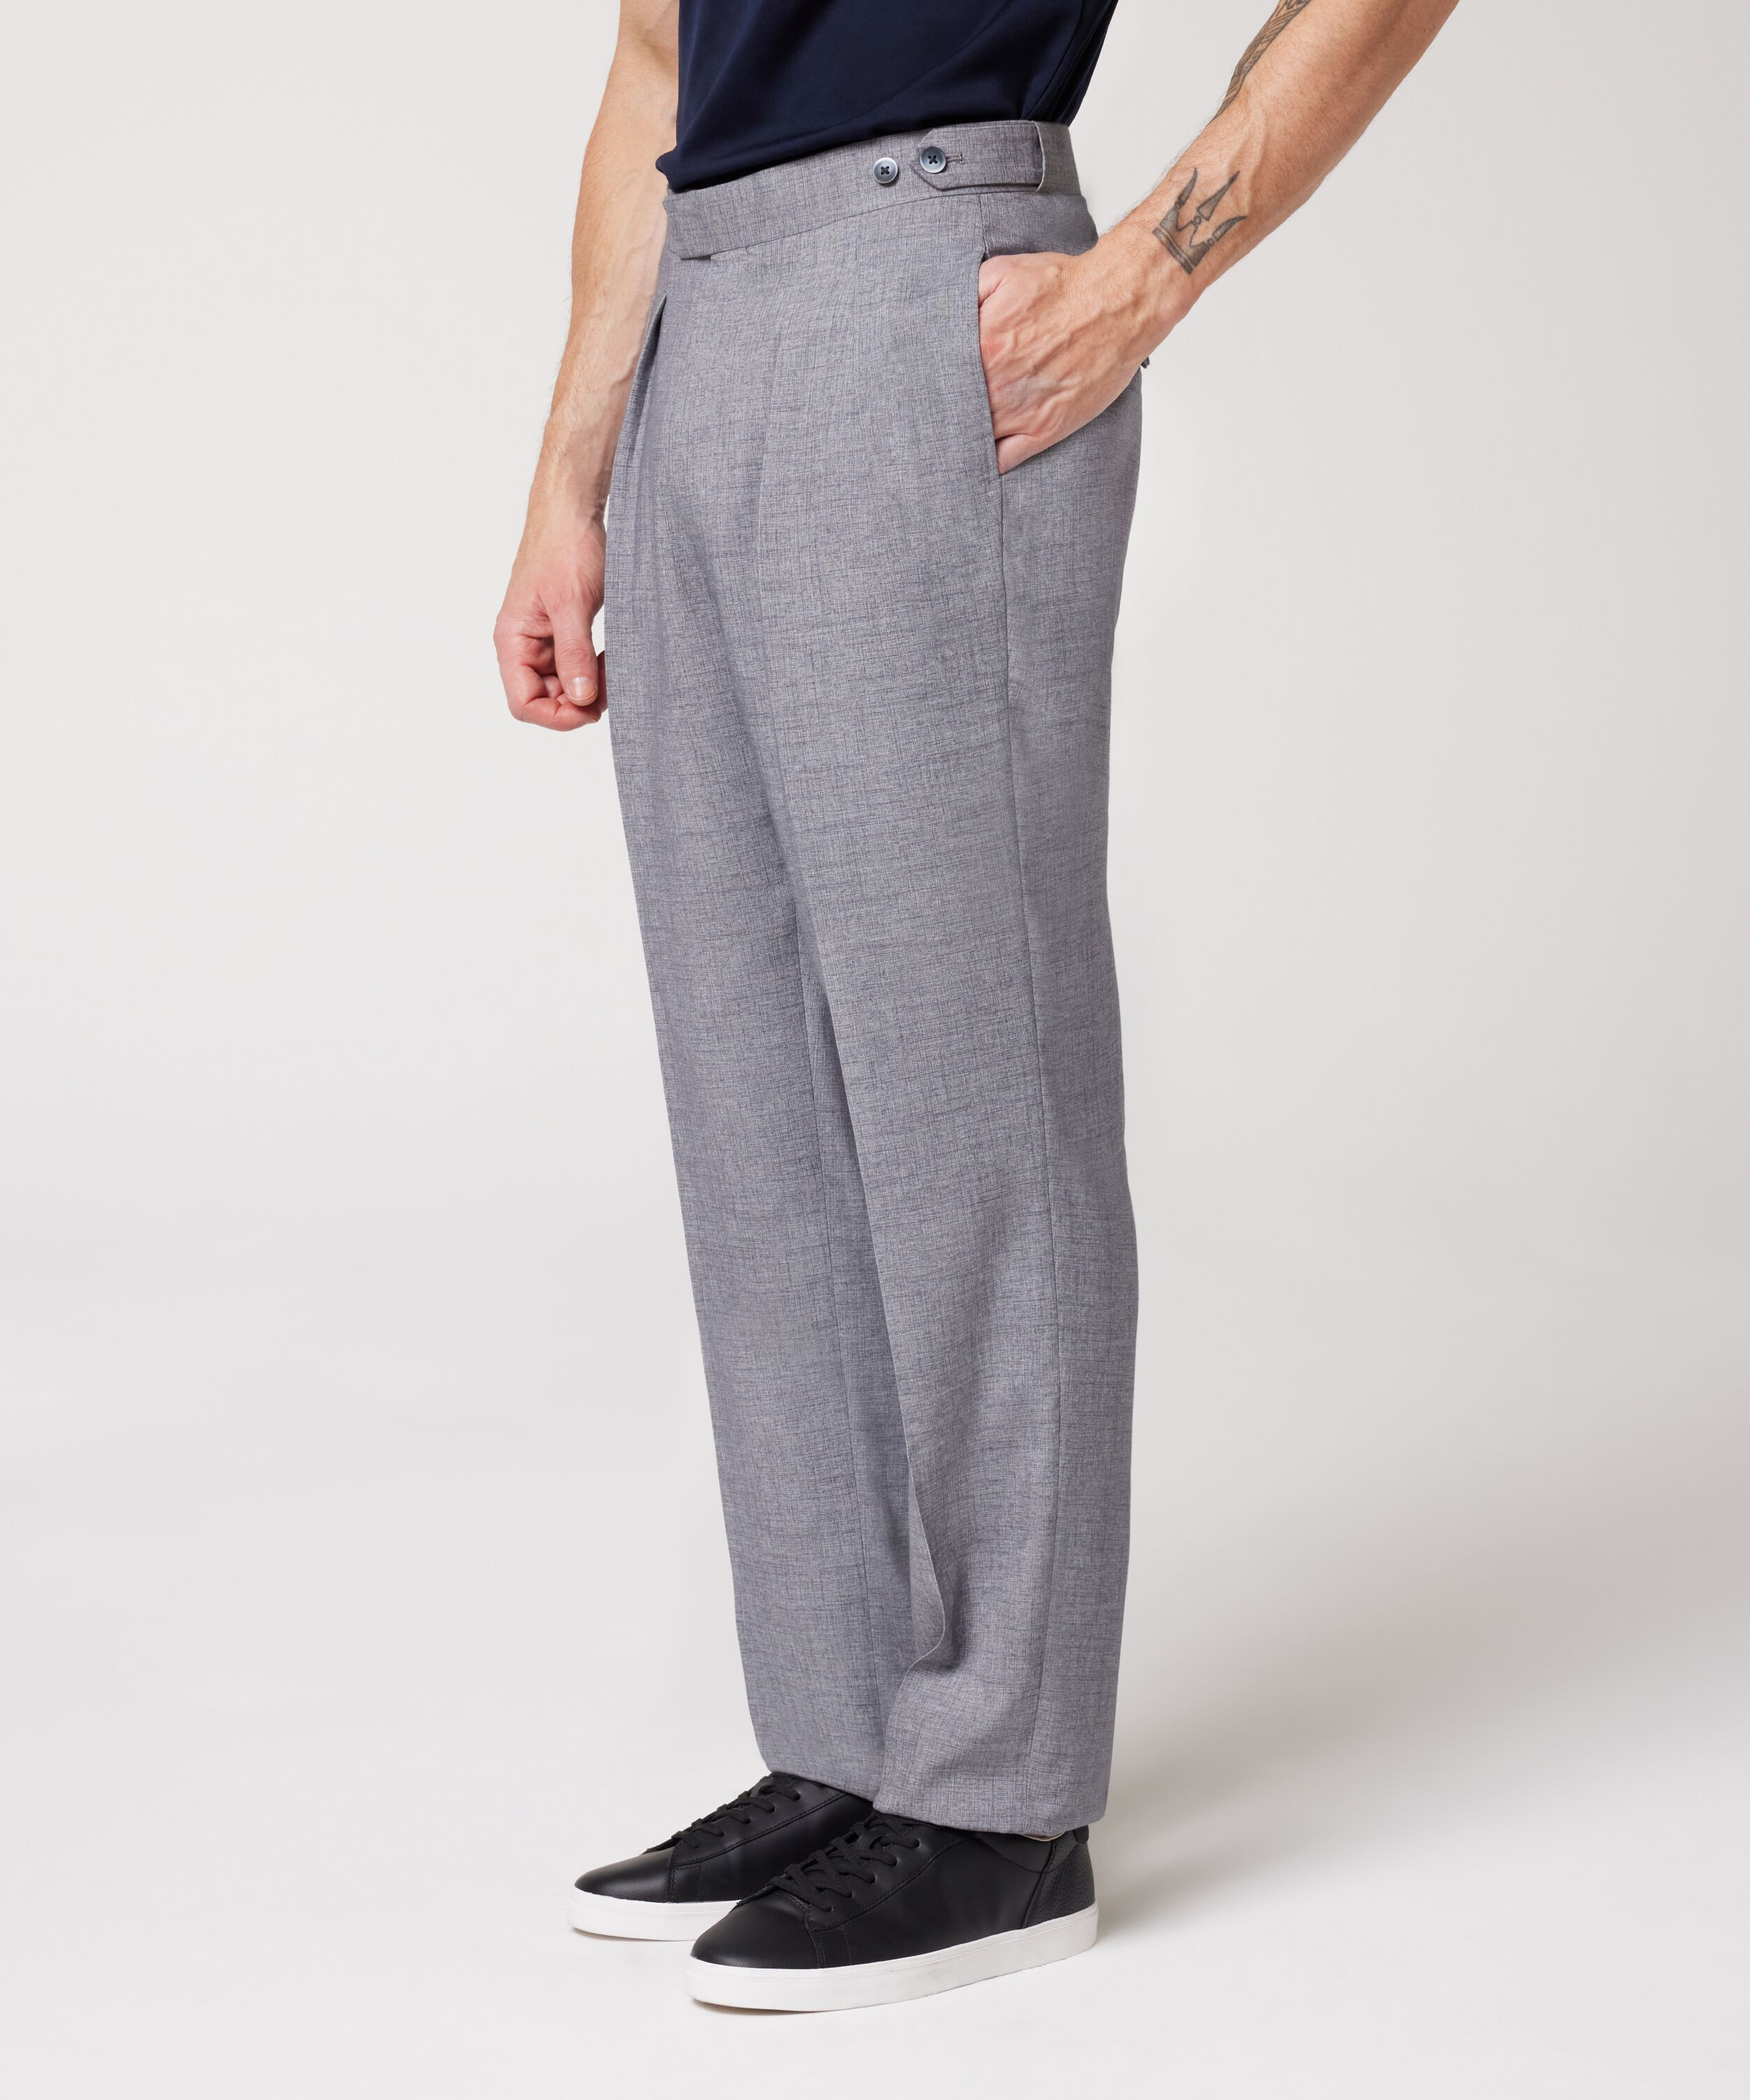 Pleated Fashion Tailored Pant - Light Grey, Suit Pants